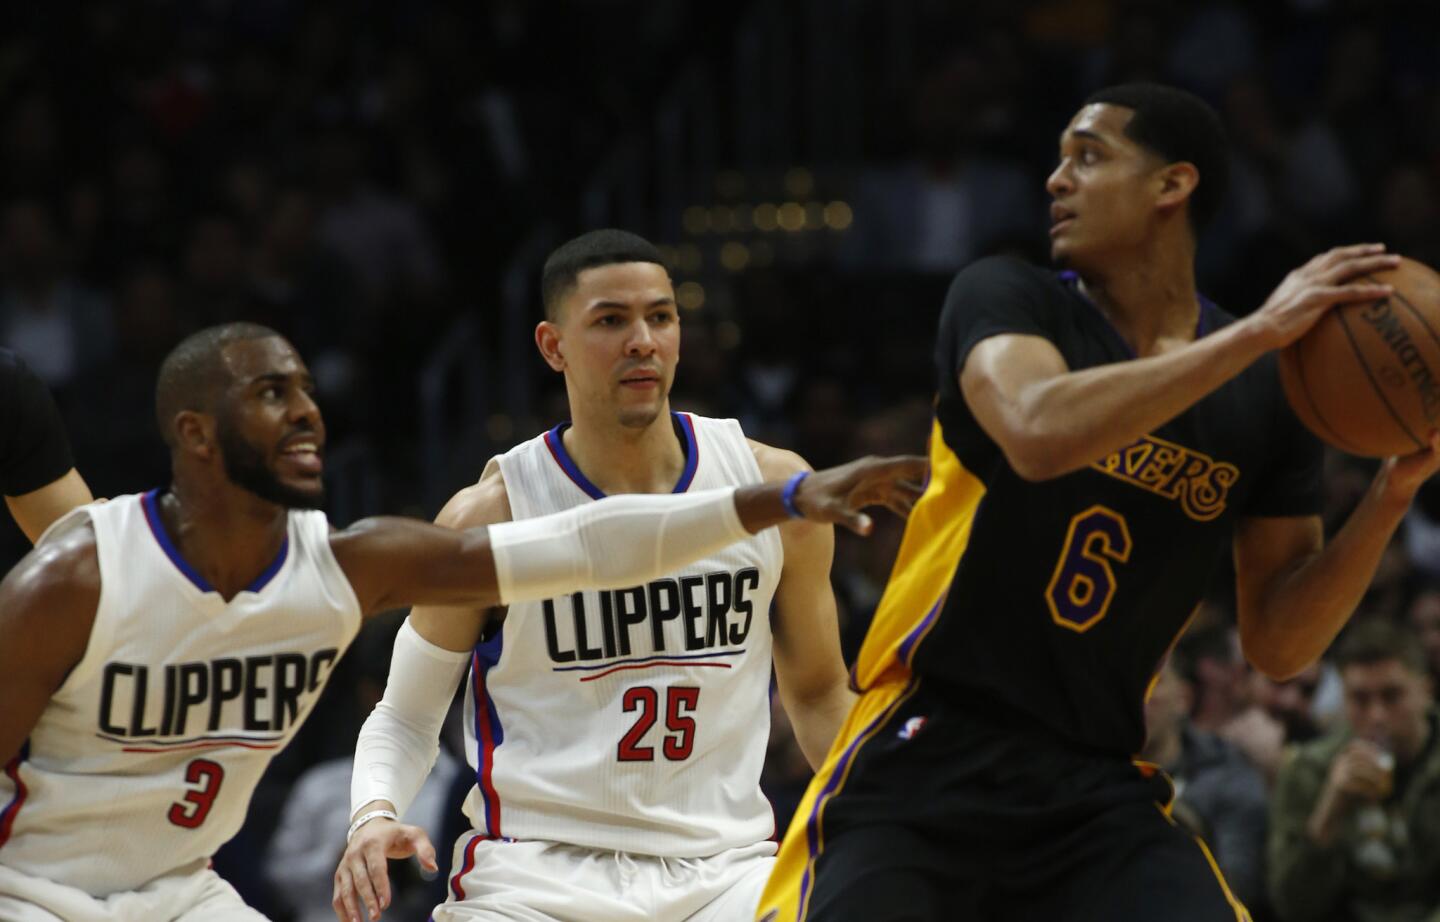 Clippers host Lakers on Tuesday night in first of back-to-back games